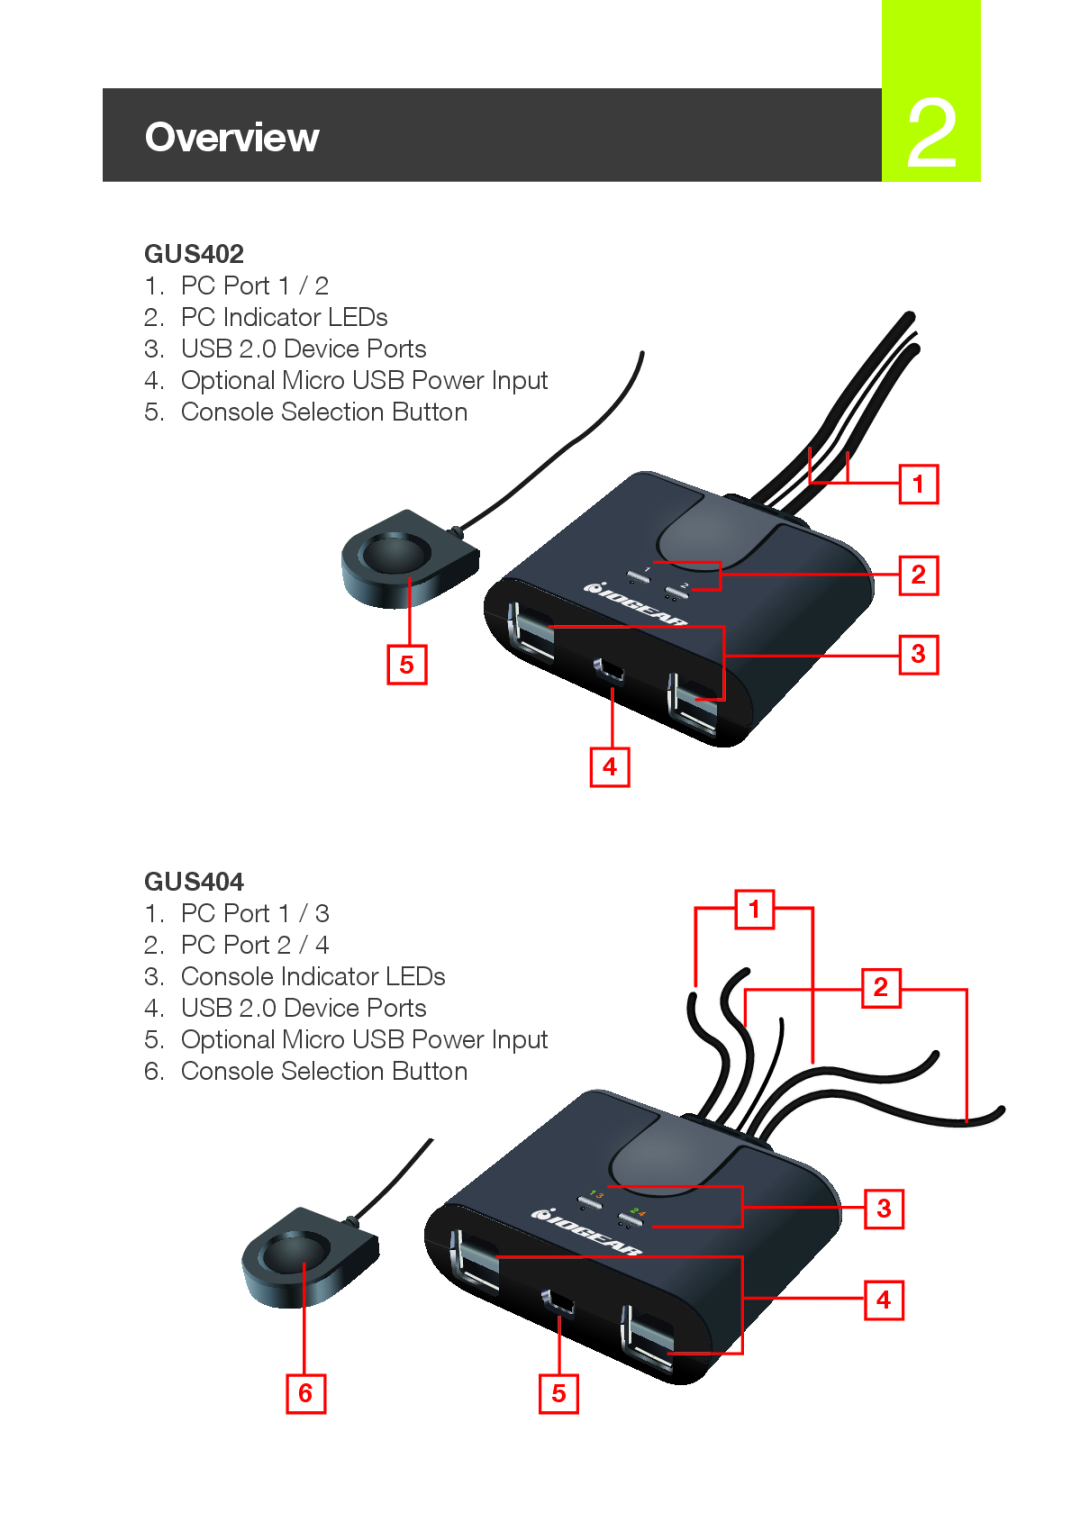 IOGear GUS402 / GUS404 Overview, PC Port 1 2. PC Indicator LEDs 3. USB 2.0 Device Ports, Console Selection Button 